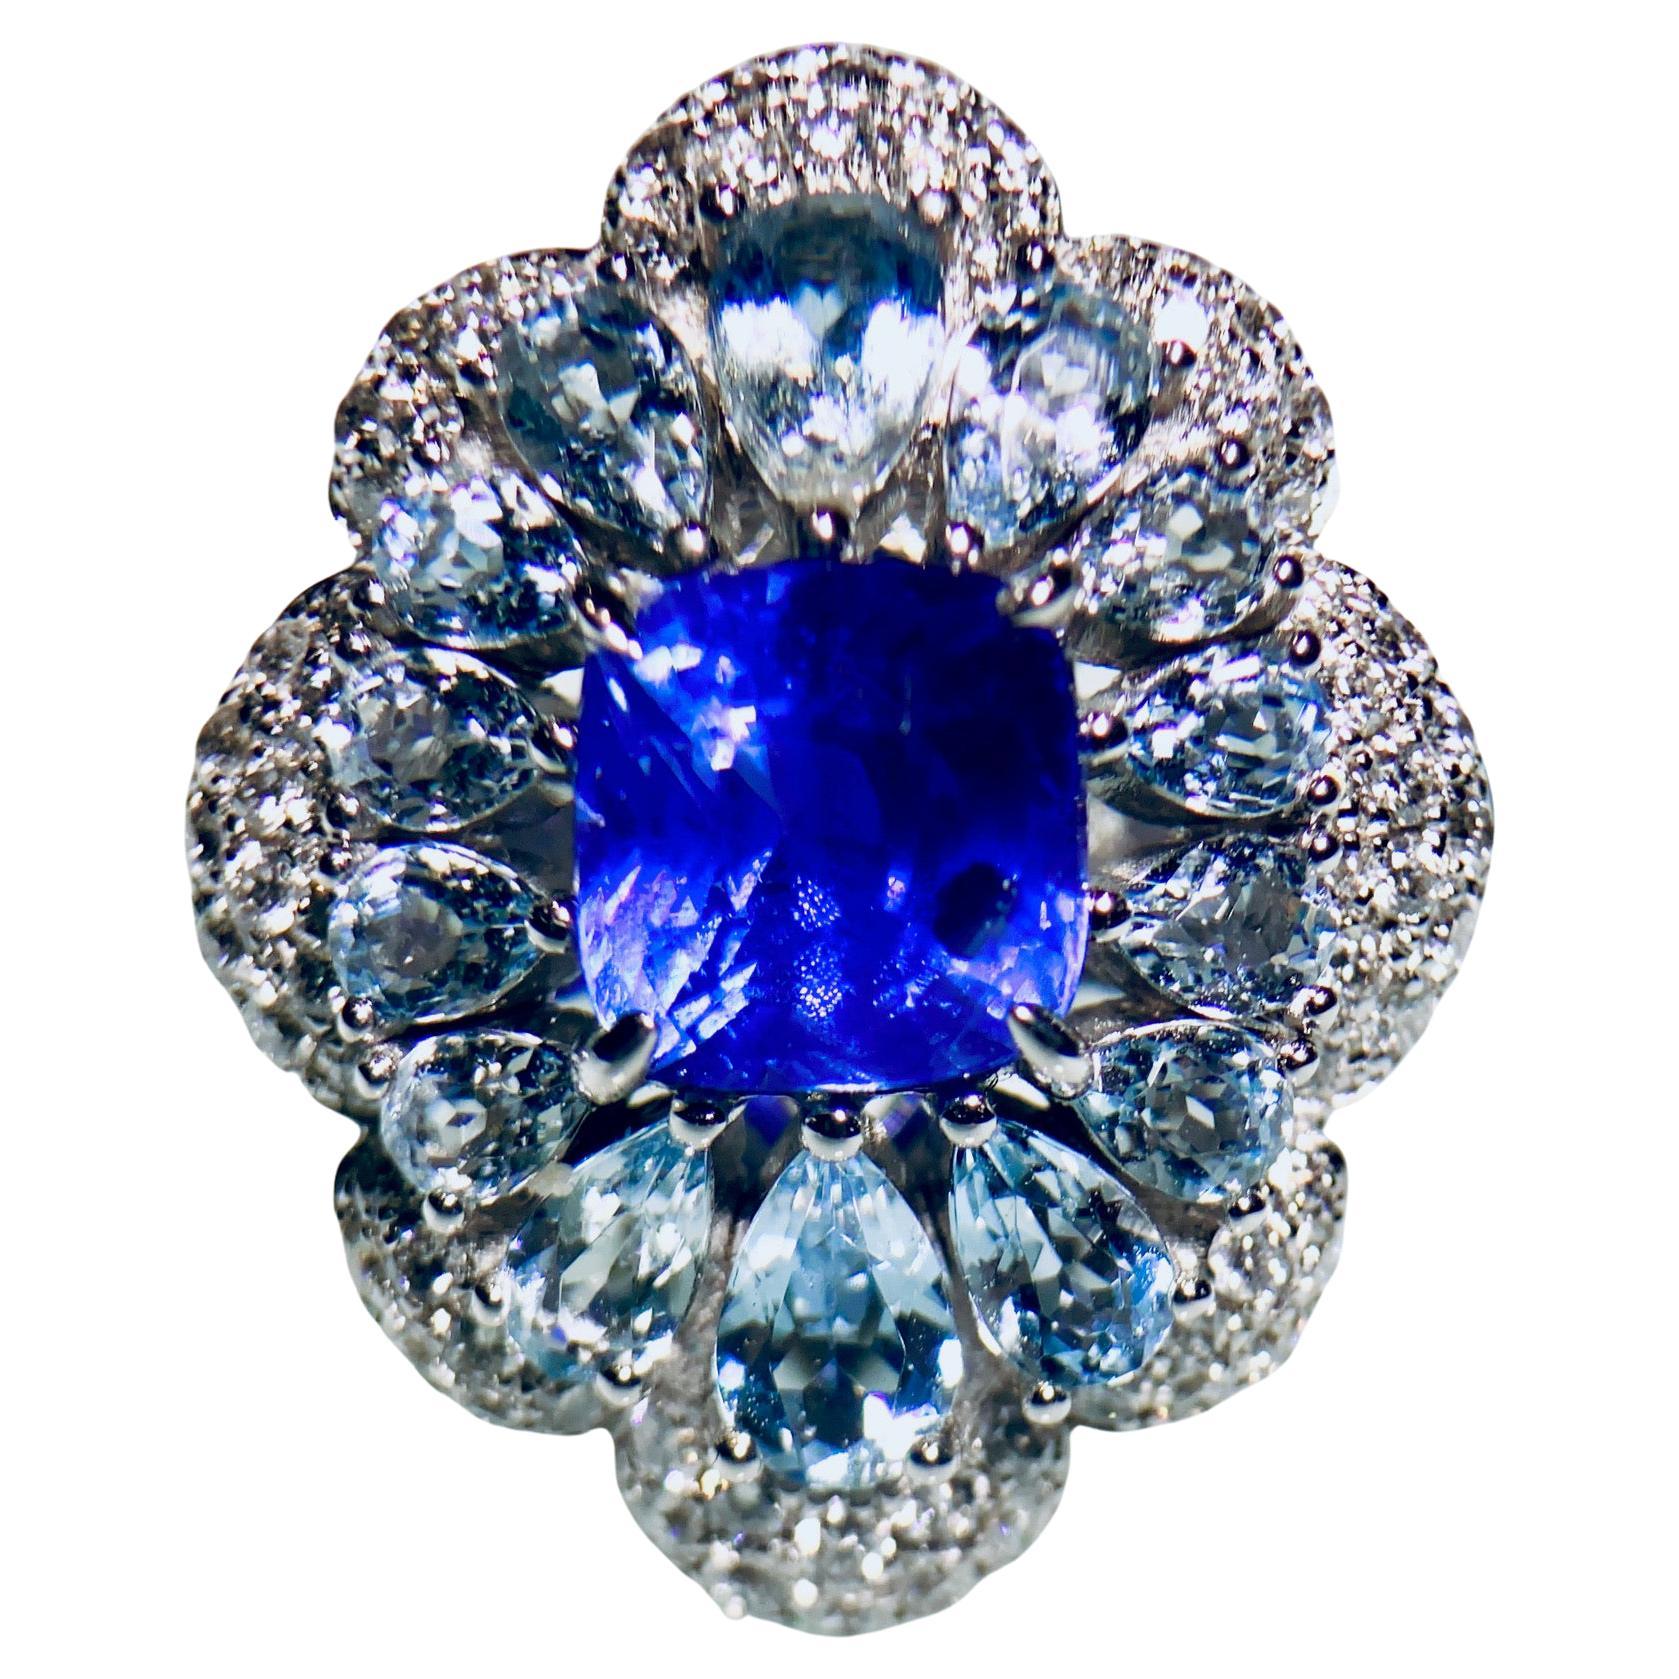 For Sale:  EOSTRE Unheated Sapphire, Aquamarine and Diamond Ring in 18K White Gold